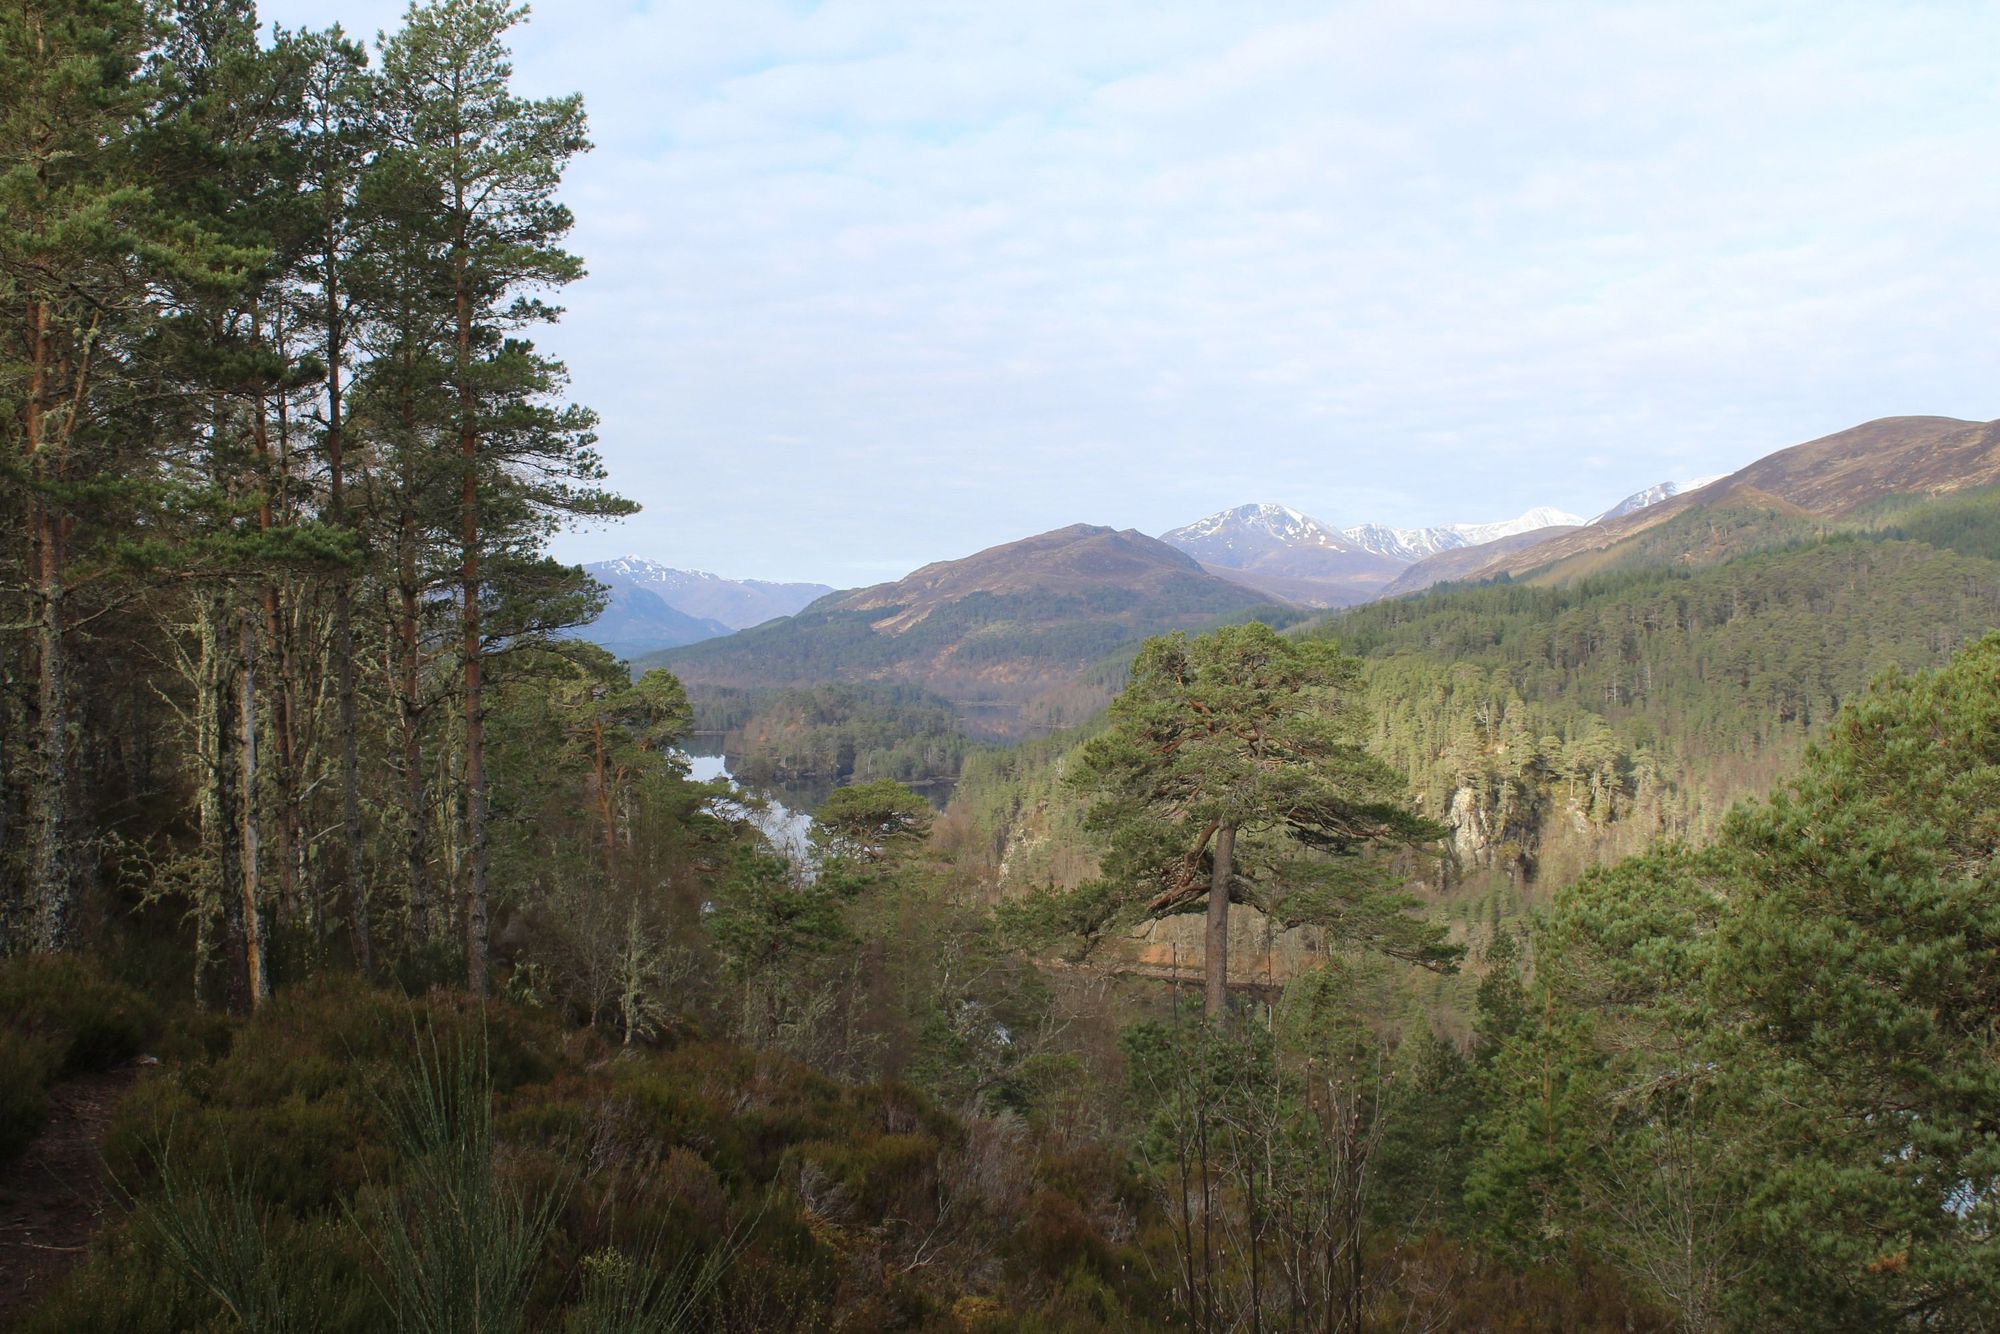 The lookout from the Glen Affric viewpoint, over Beinn a' Mheadhoin and the surrounding mountains. Photo: Stuart Kenny